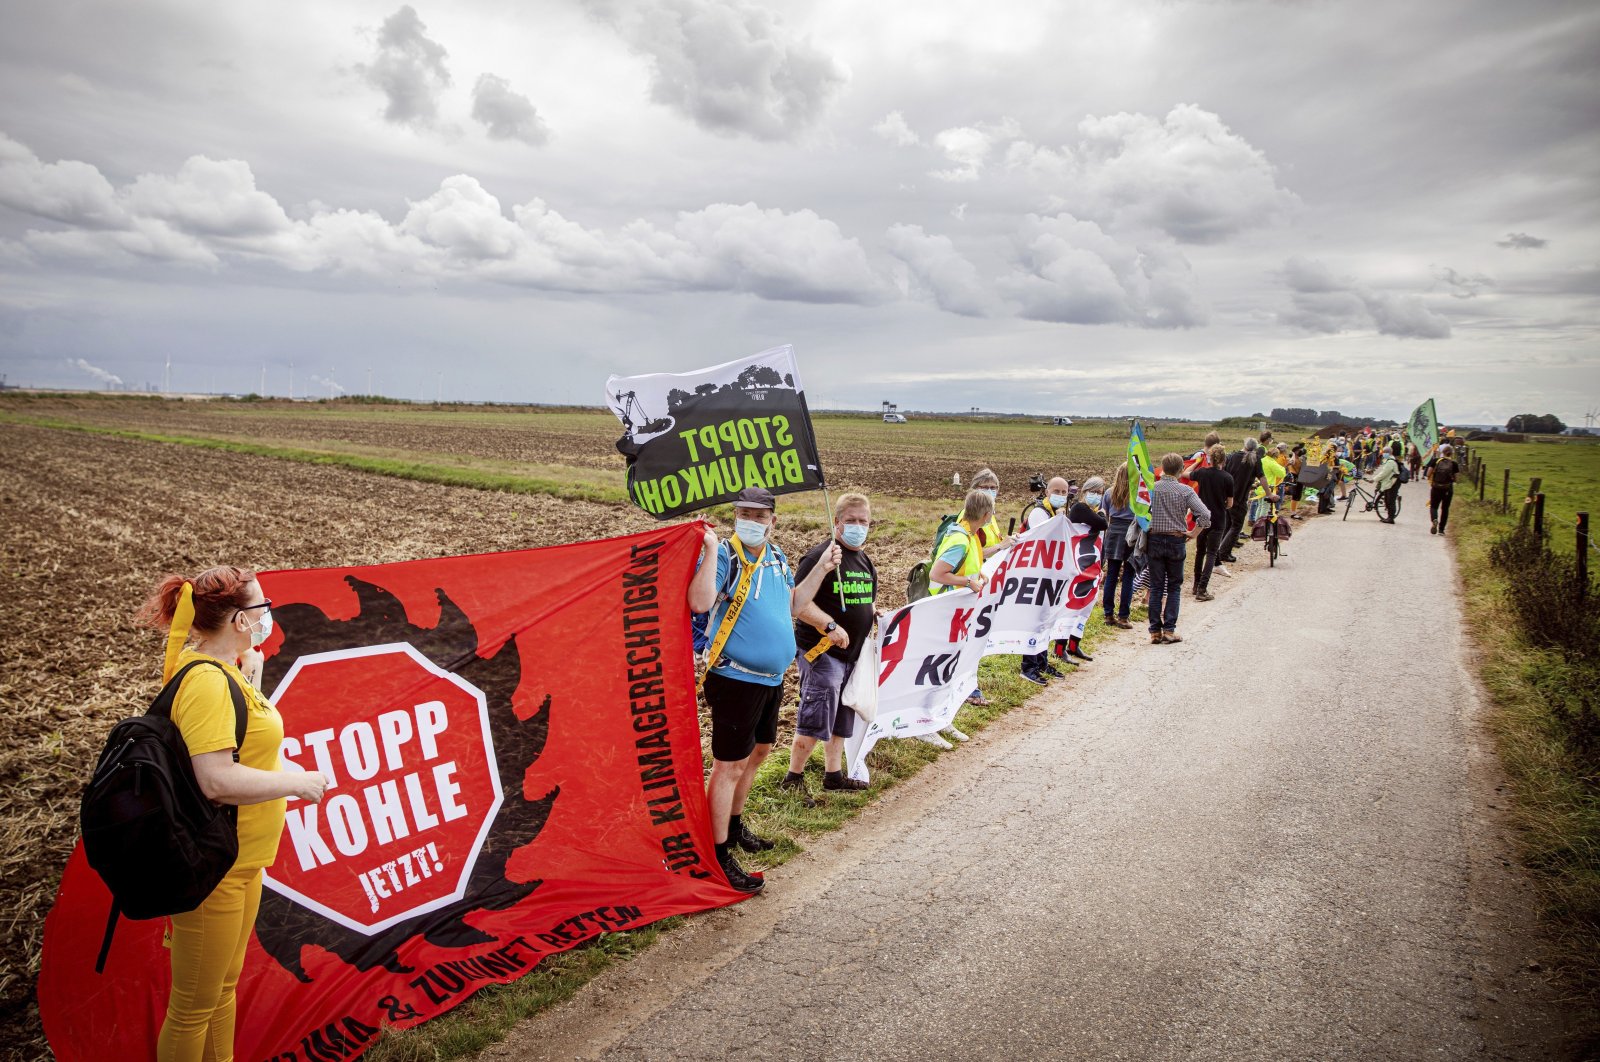 Environmental and climate activists, as well as residents of neighboring villages, form a human chain on the edge of the Garzweiler open-cast mine in Juechen, Germany, Aug. 7, 2021.  (Malte Krudewig/dpa via AP)